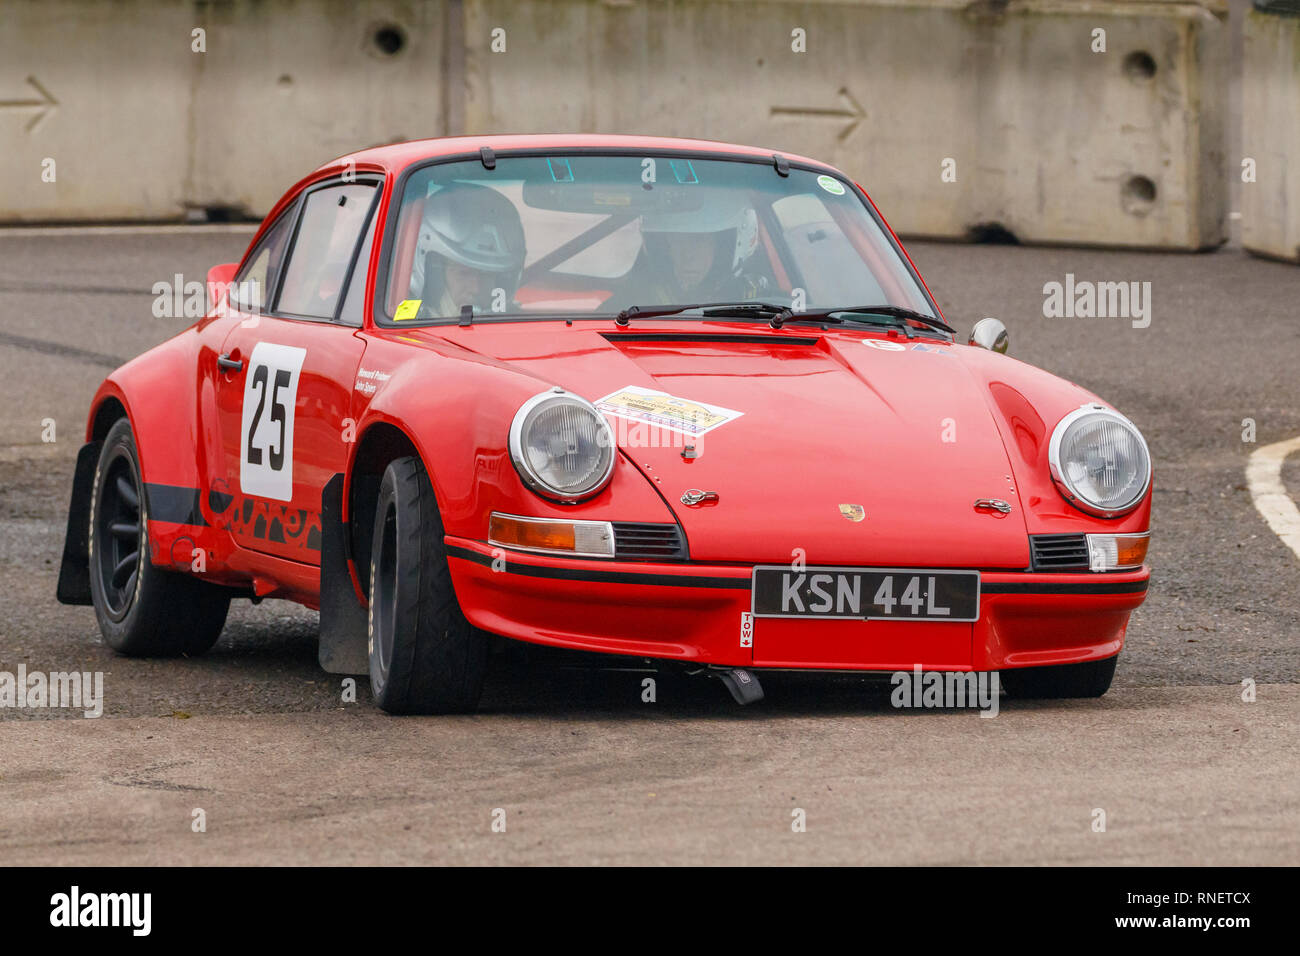 Porsche 911, KSN 44L, with driver John Spiers and co-driver Howard Pridmore during the 2019 Snetterton Stage Rally, Norfolk. Stock Photo